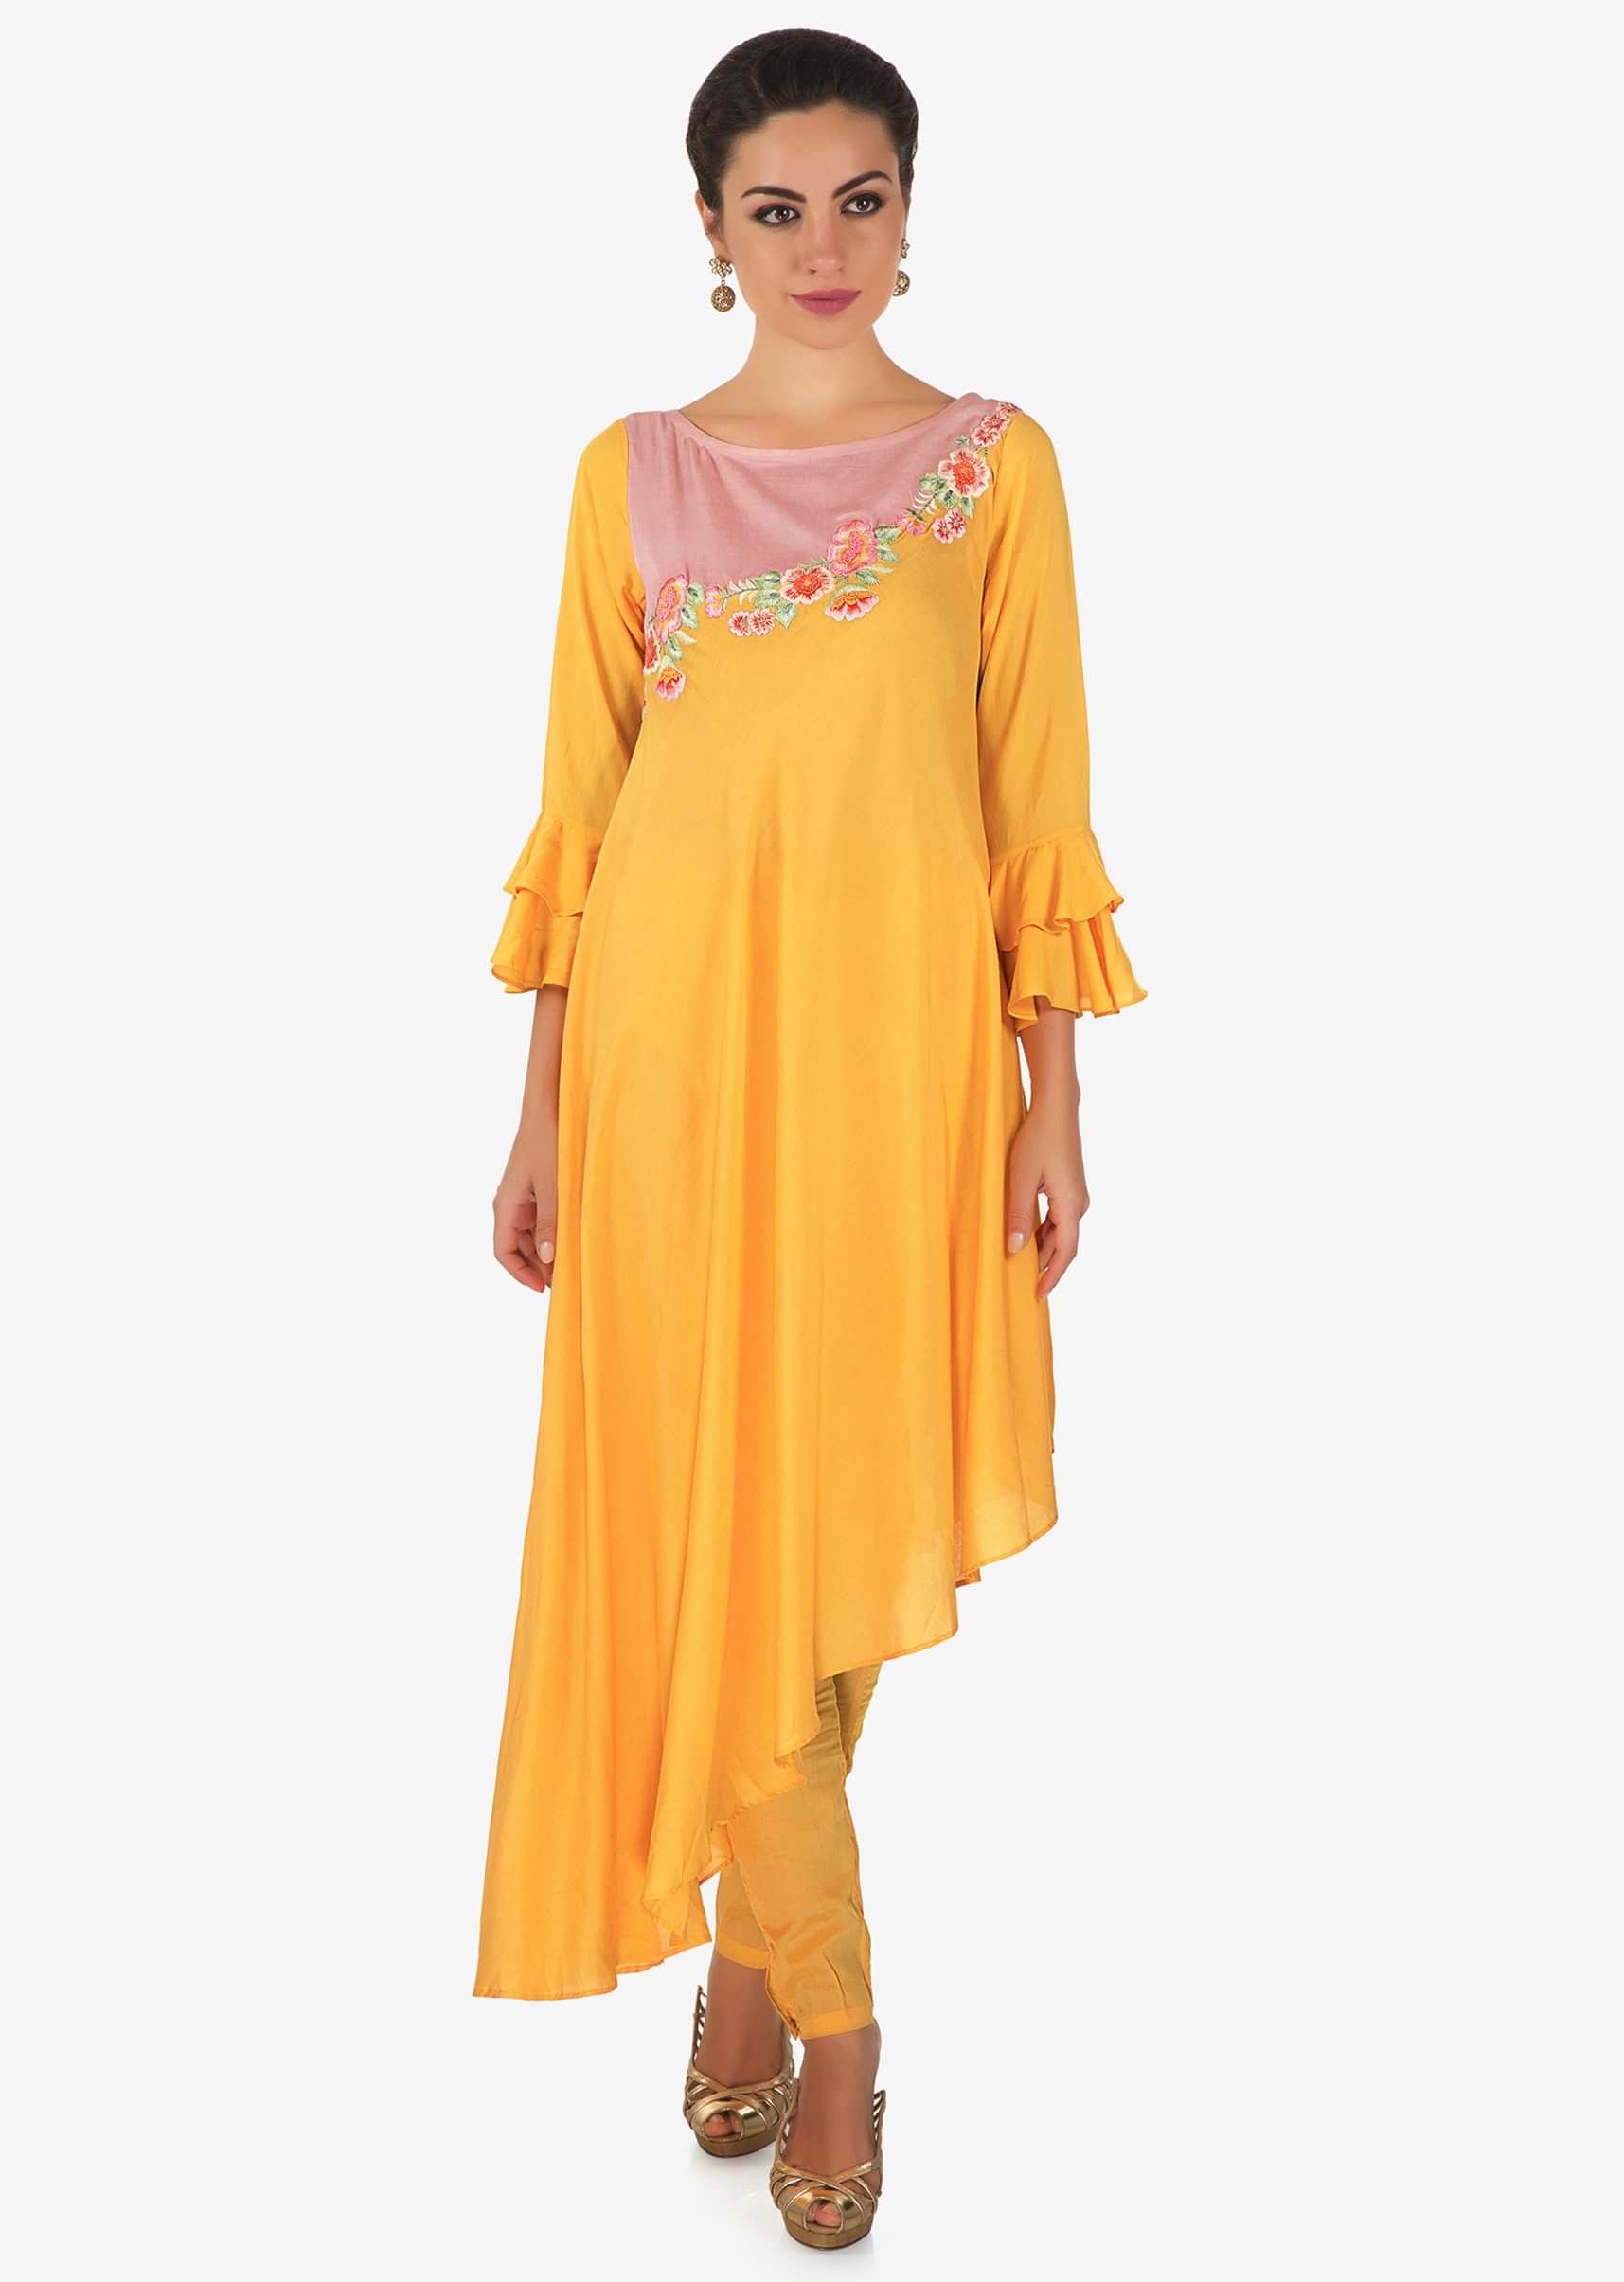 Yellow asymmetric suit with pink yoke embellished in resham and french knot work only on Kalki